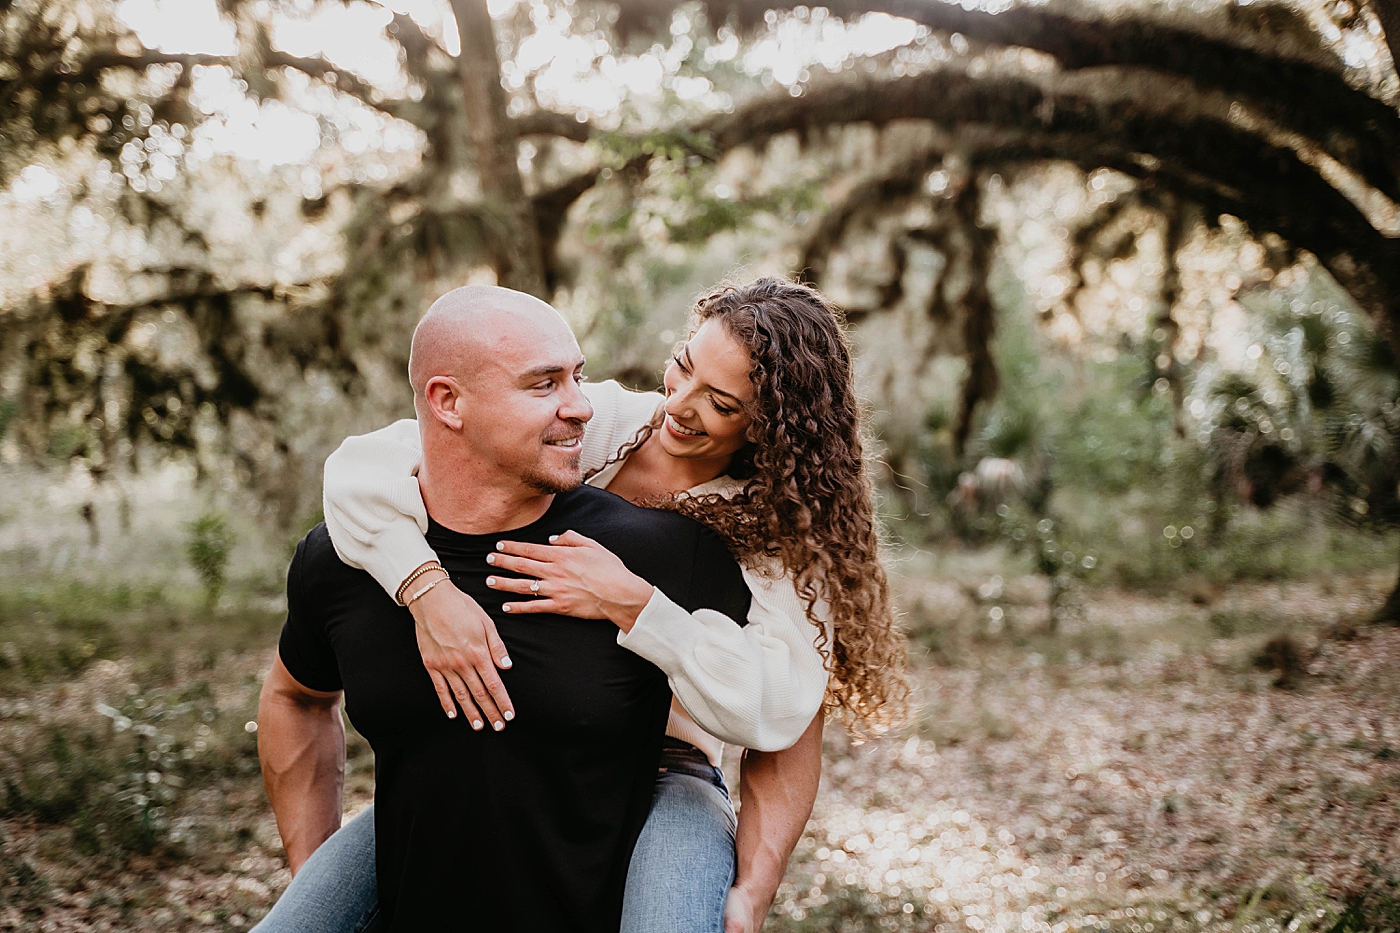 Couple piggy backing Romantic Riverbend Park Engagement Photography captured by South Florida Photographer Krystal Capone Photography